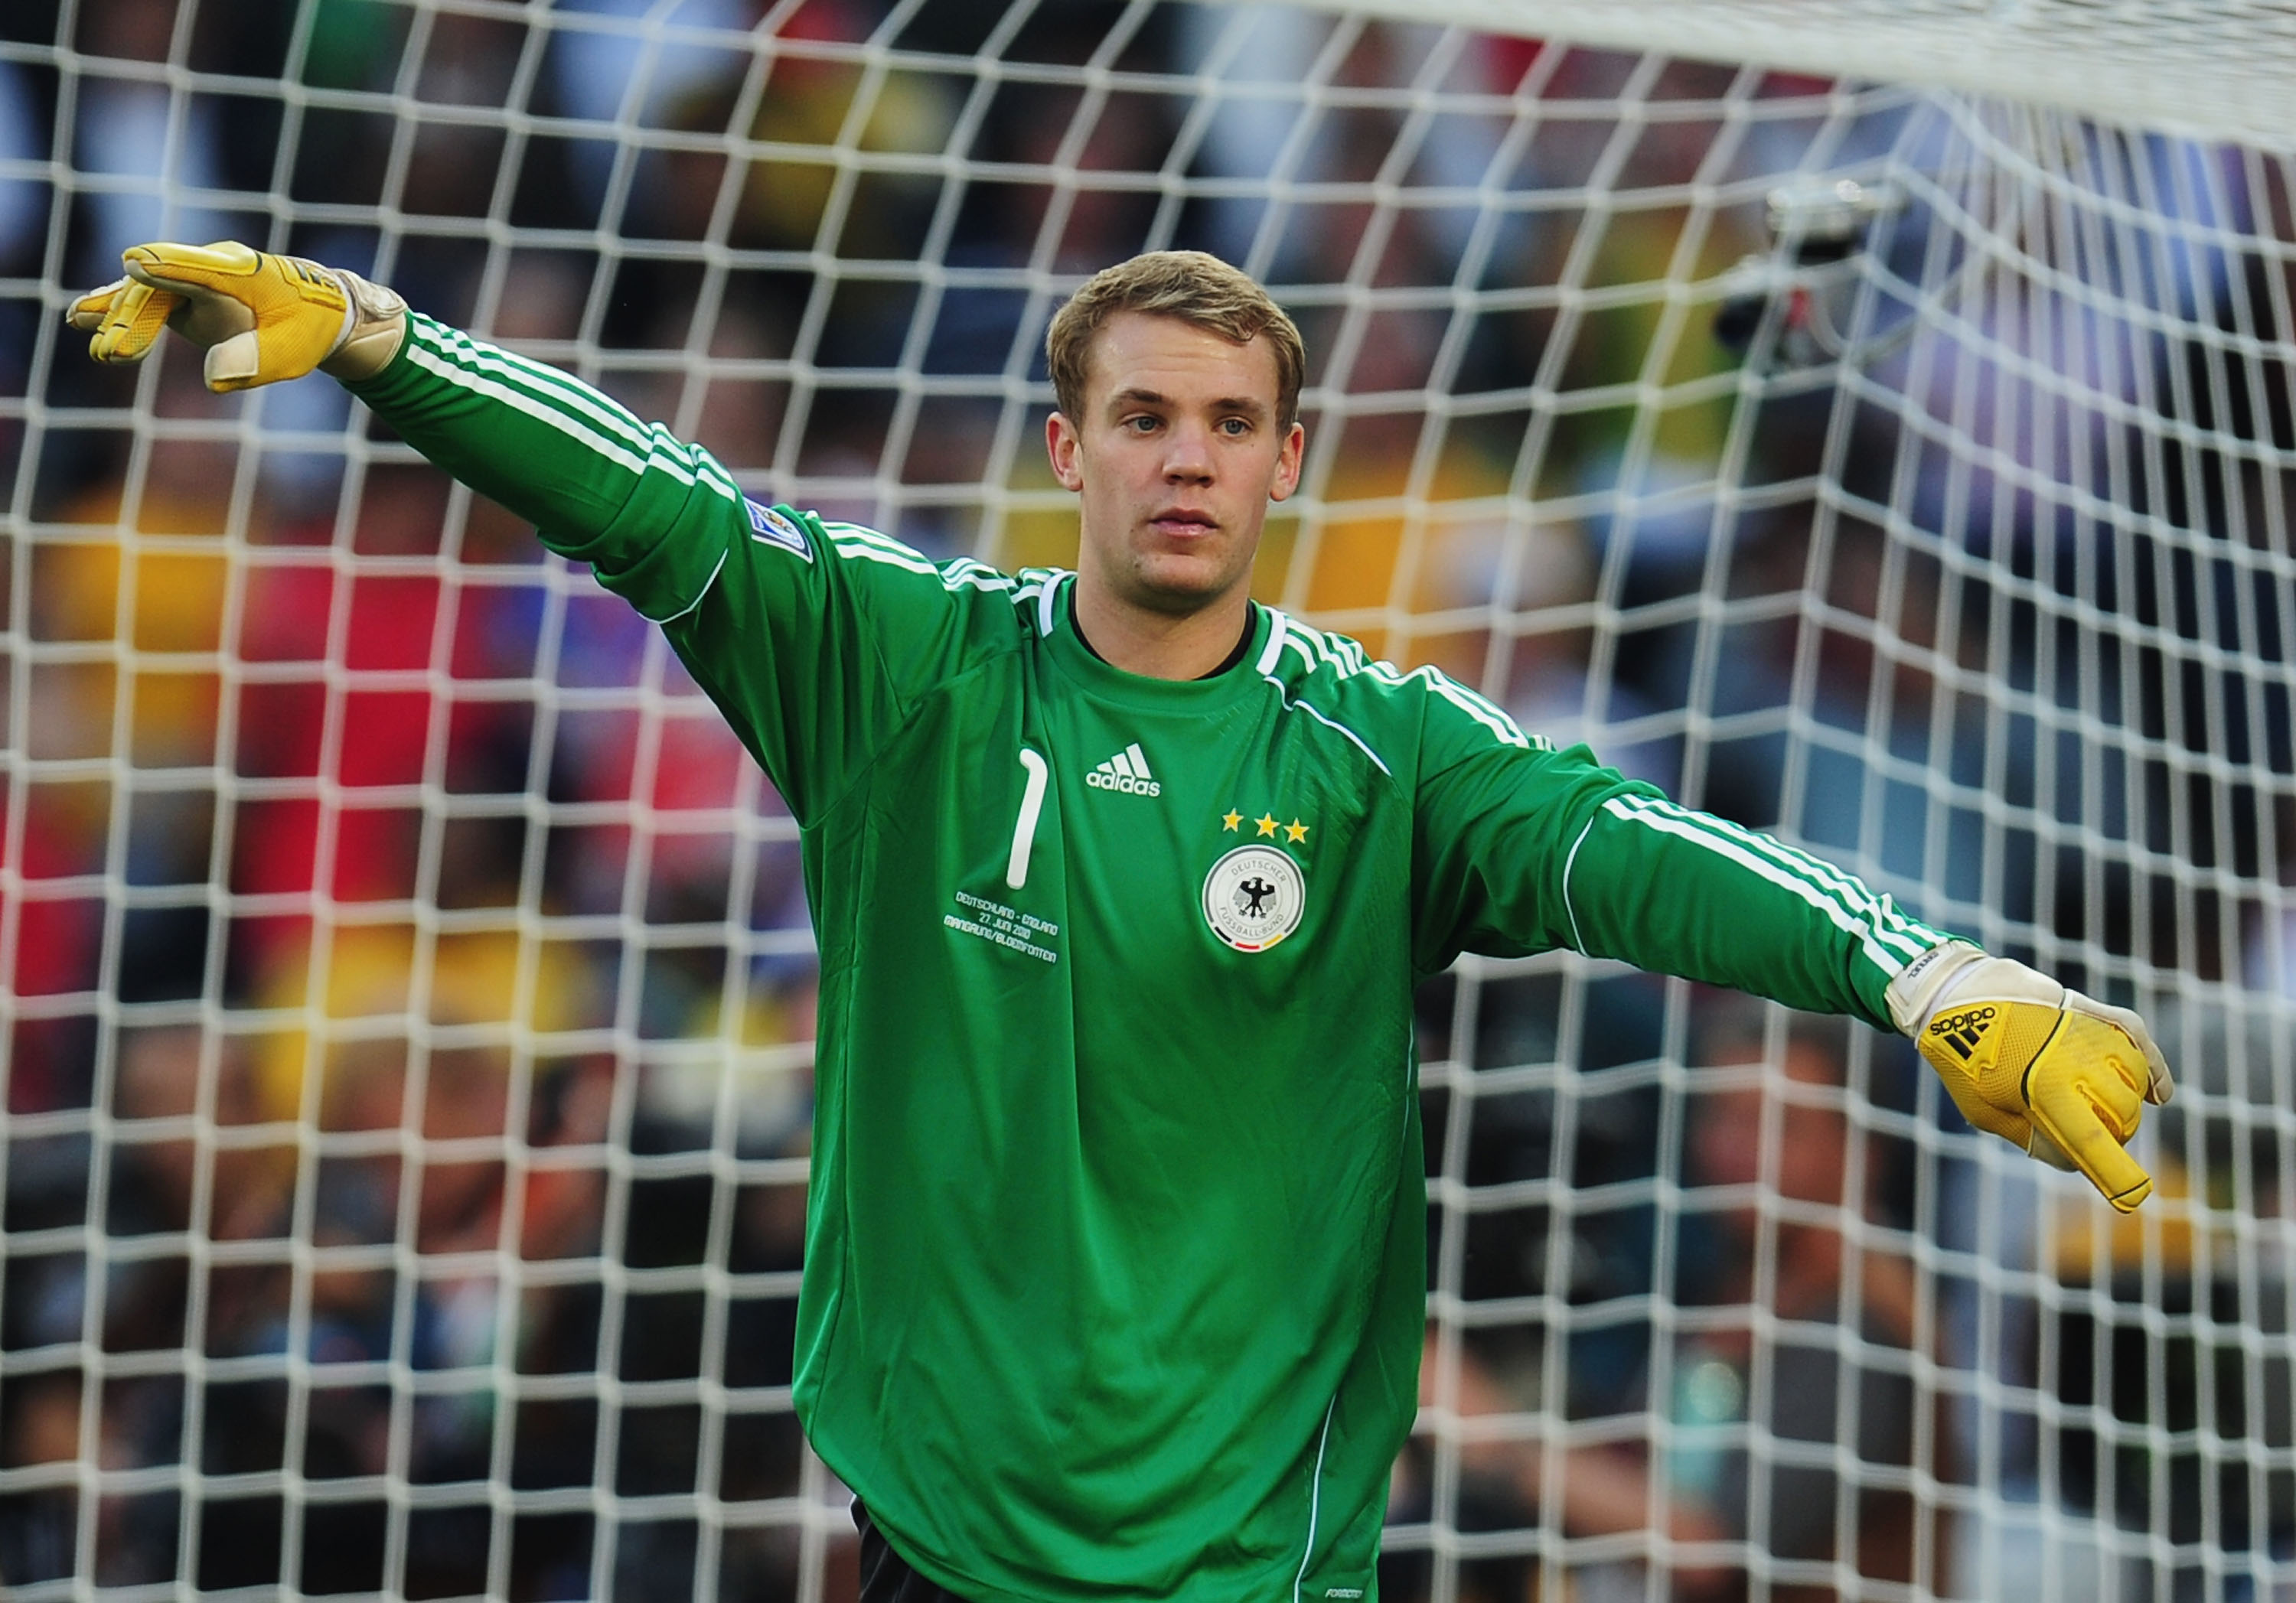 BLOEMFONTEIN, SOUTH AFRICA - JUNE 27: Manuel Neuer of Germany in action during the 2010 FIFA World Cup South Africa Round of Sixteen match between Germany and England at Free State Stadium on June 27, 2010 in Bloemfontein, South Africa.  (Photo by Clive M